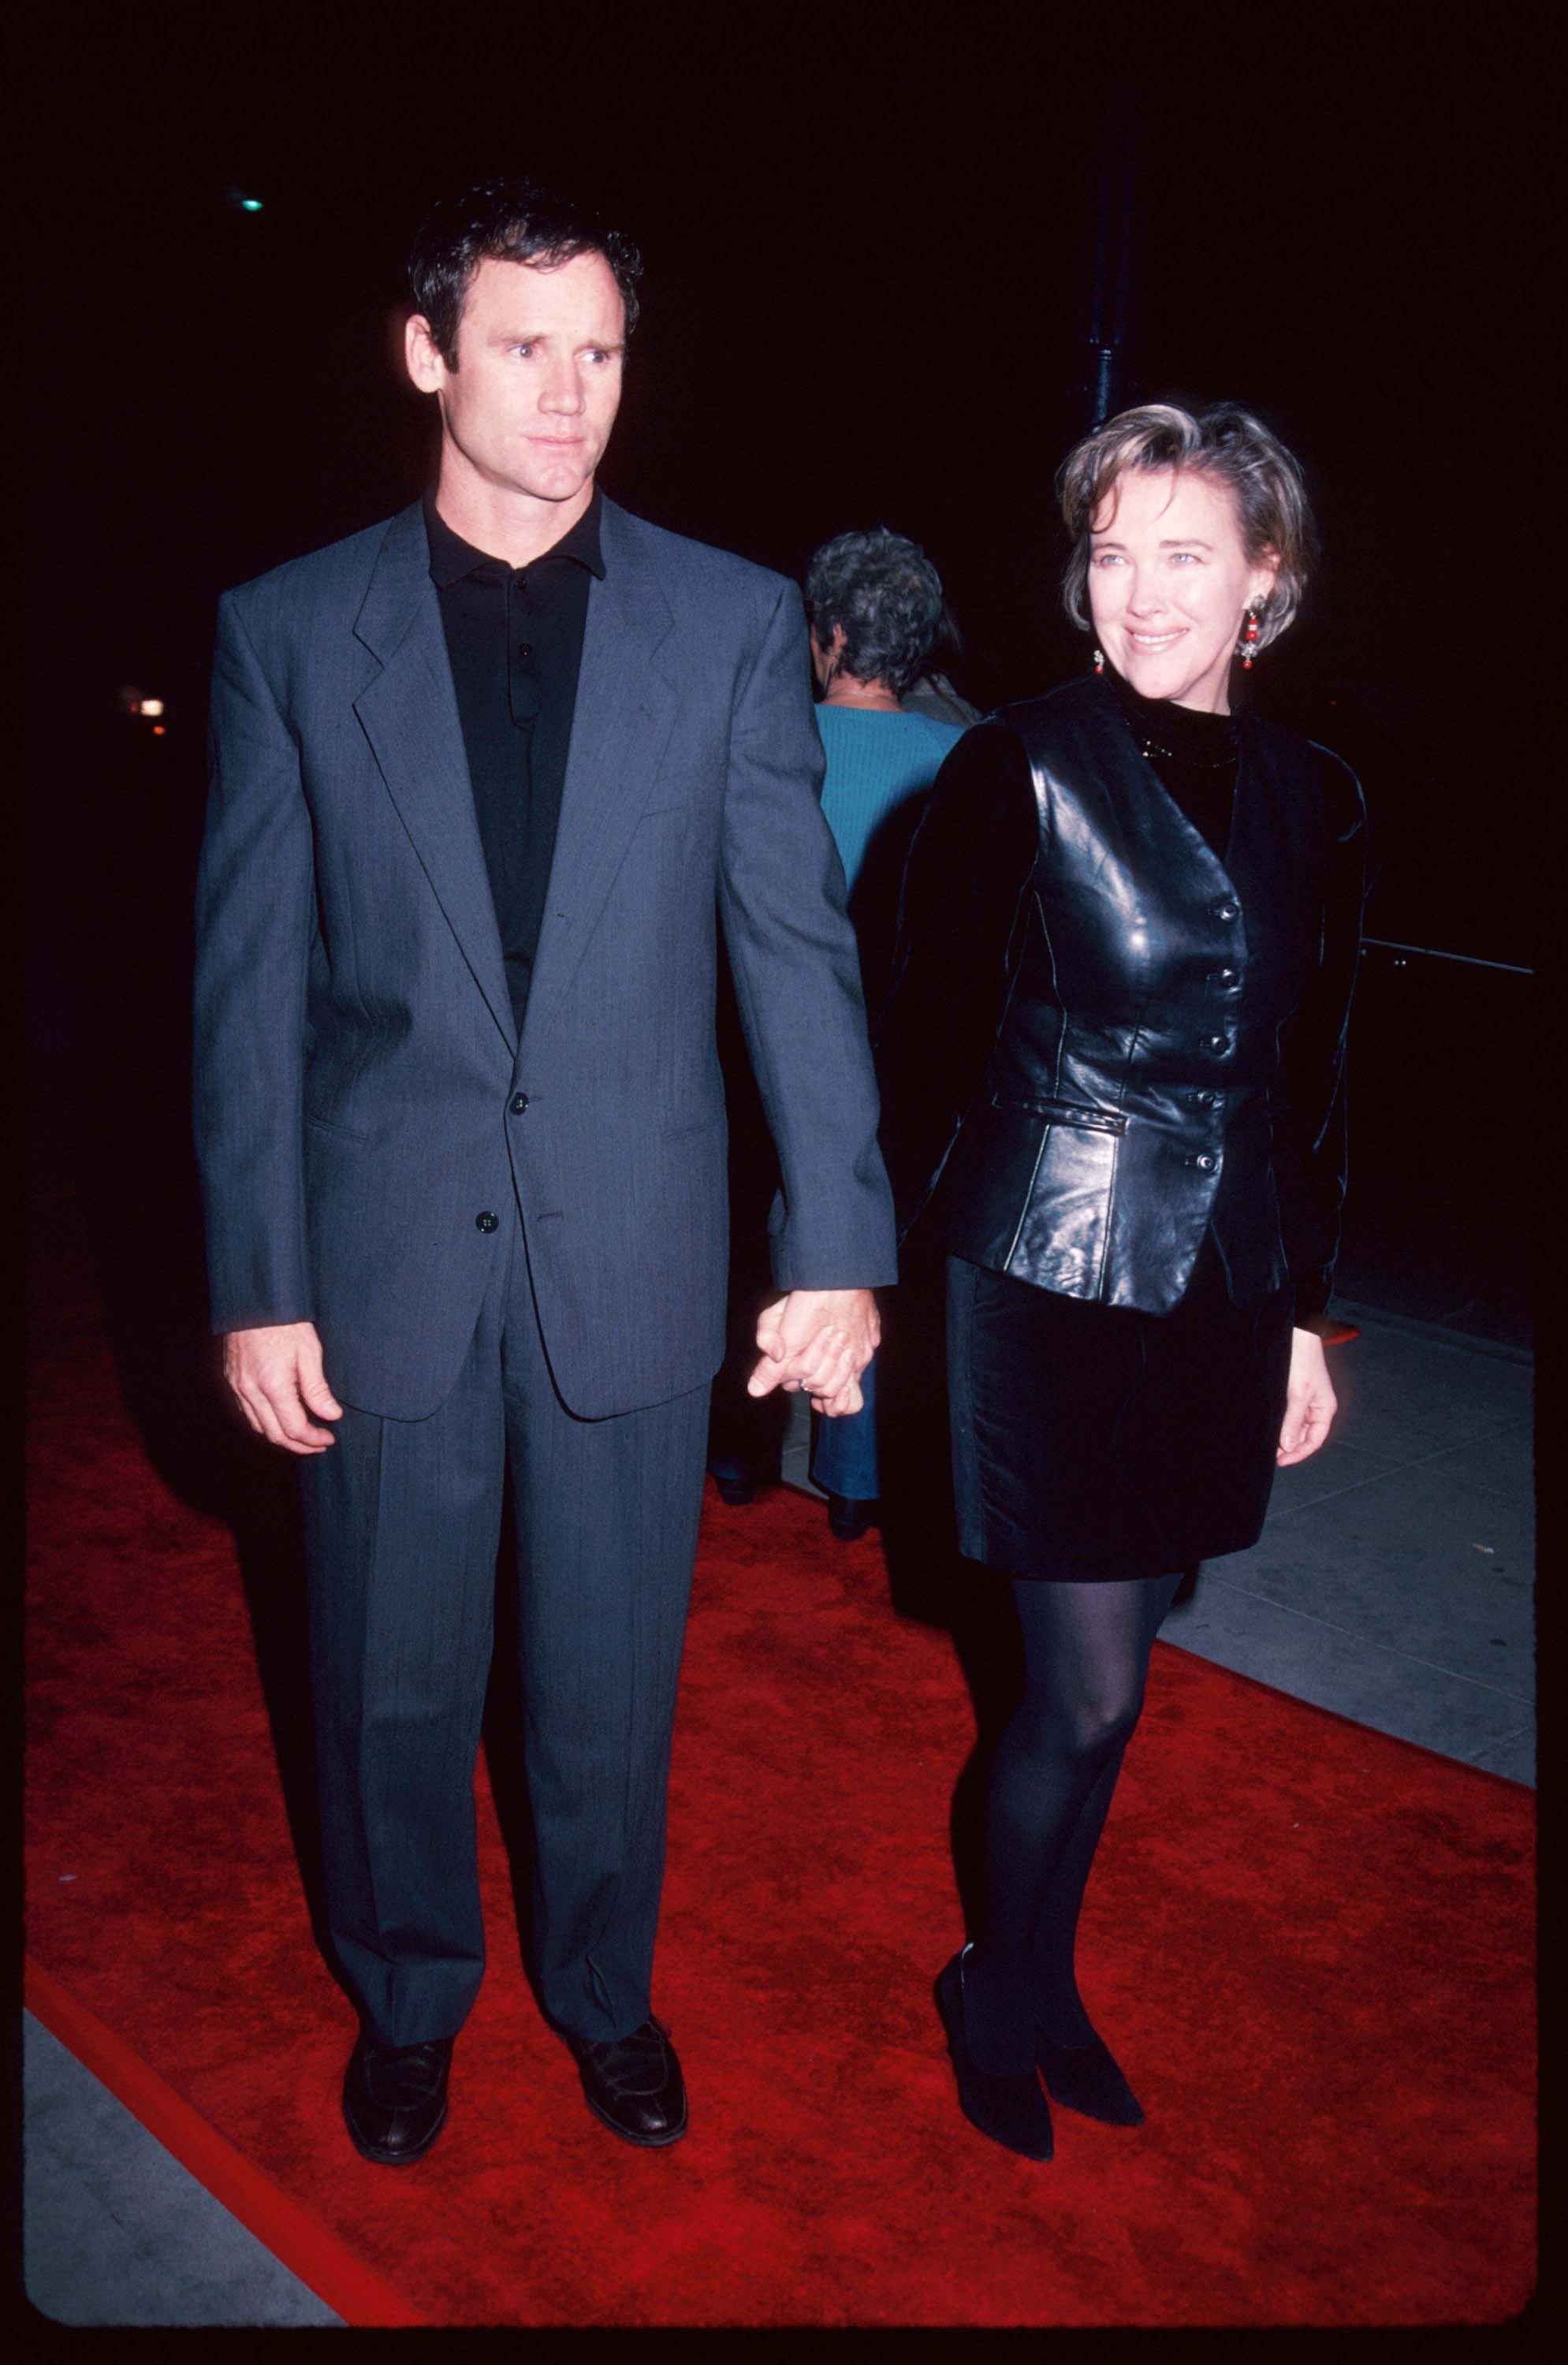 Actress Catherine O''Hara and Bo Welch at the premiere of "Hoffa" December 11, 1992 | Photo: Getty Images